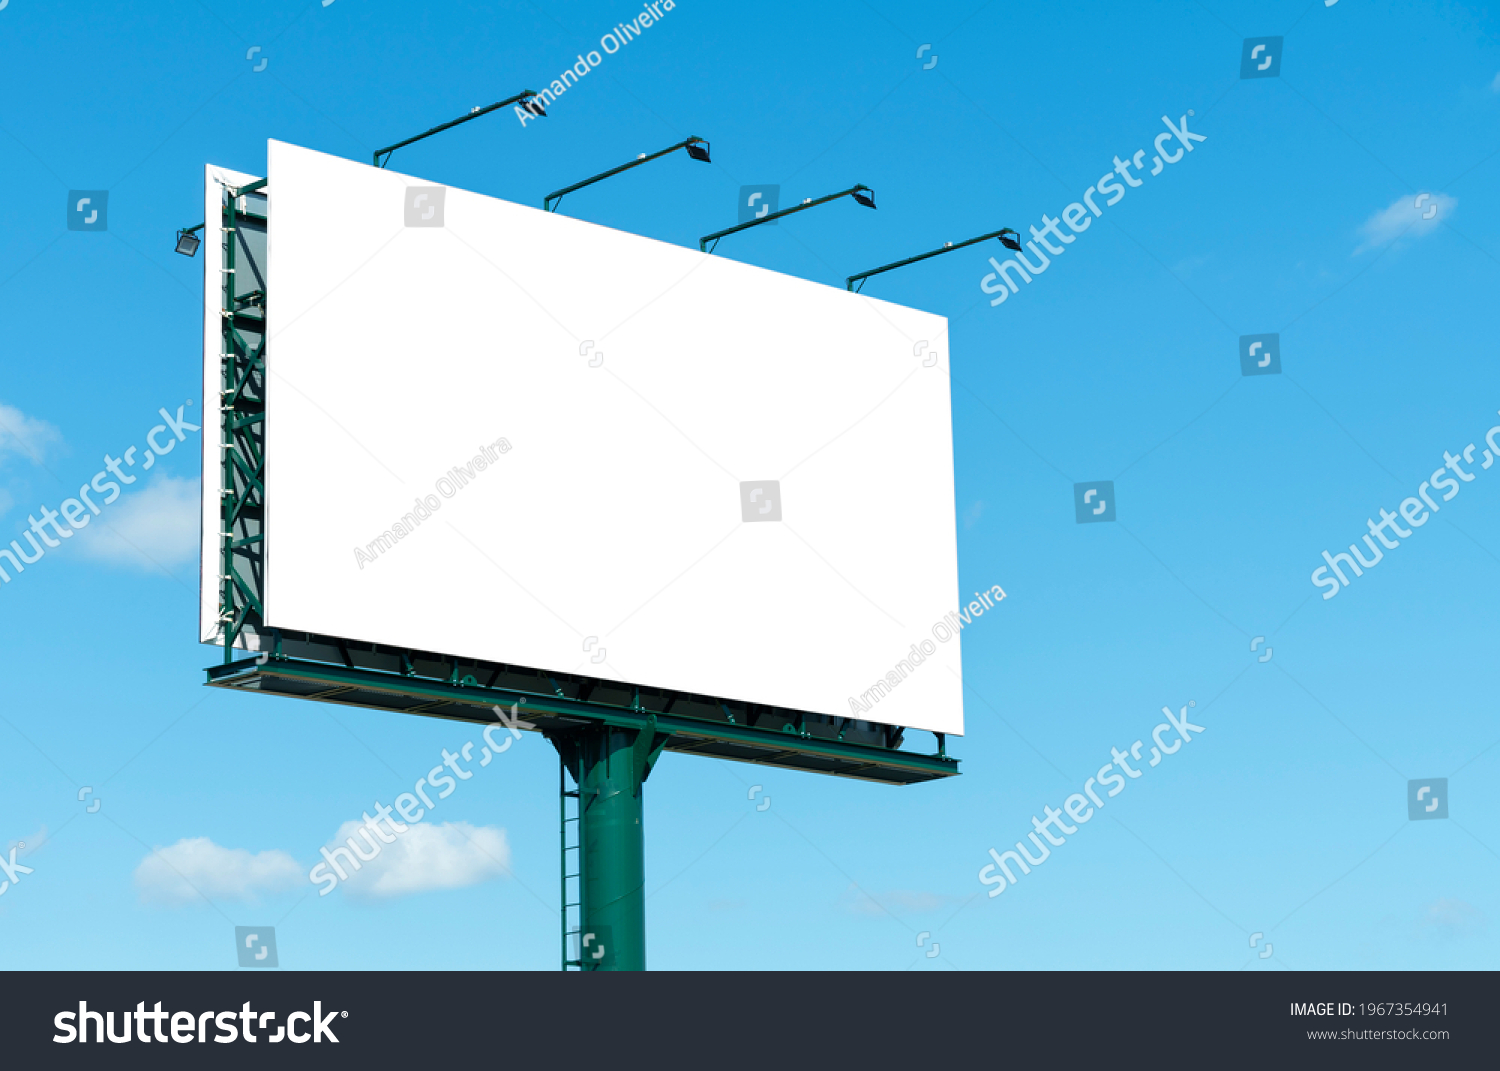 empty advertising billboard on the highway, with blue sky - advertising concept - copy space - mockup
 #1967354941